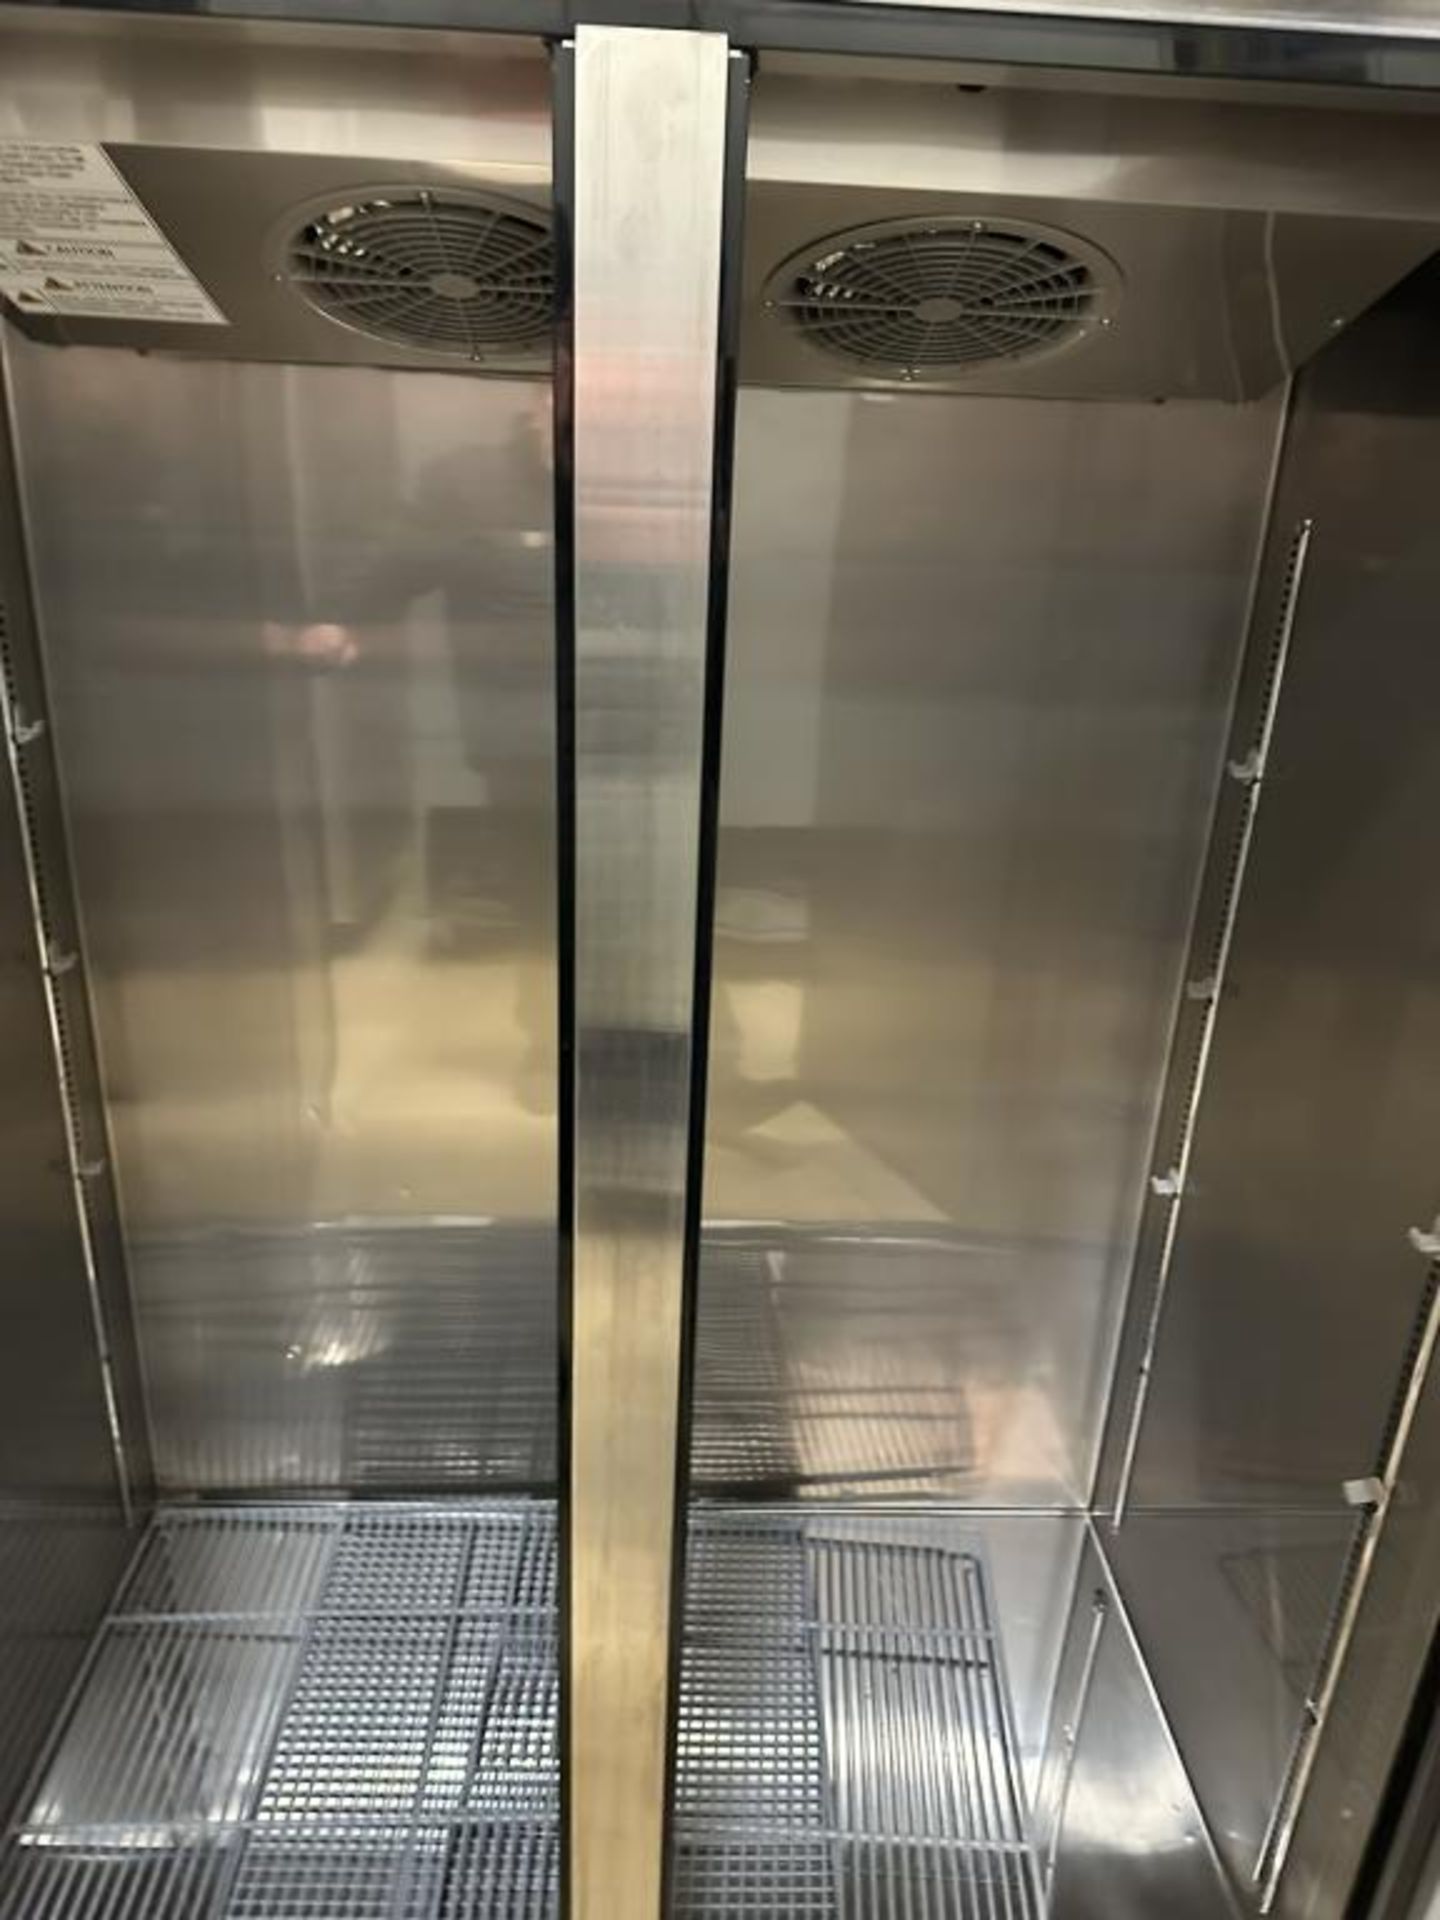 Turbo Air 2-Section Commercial Refrigerator - Image 3 of 4